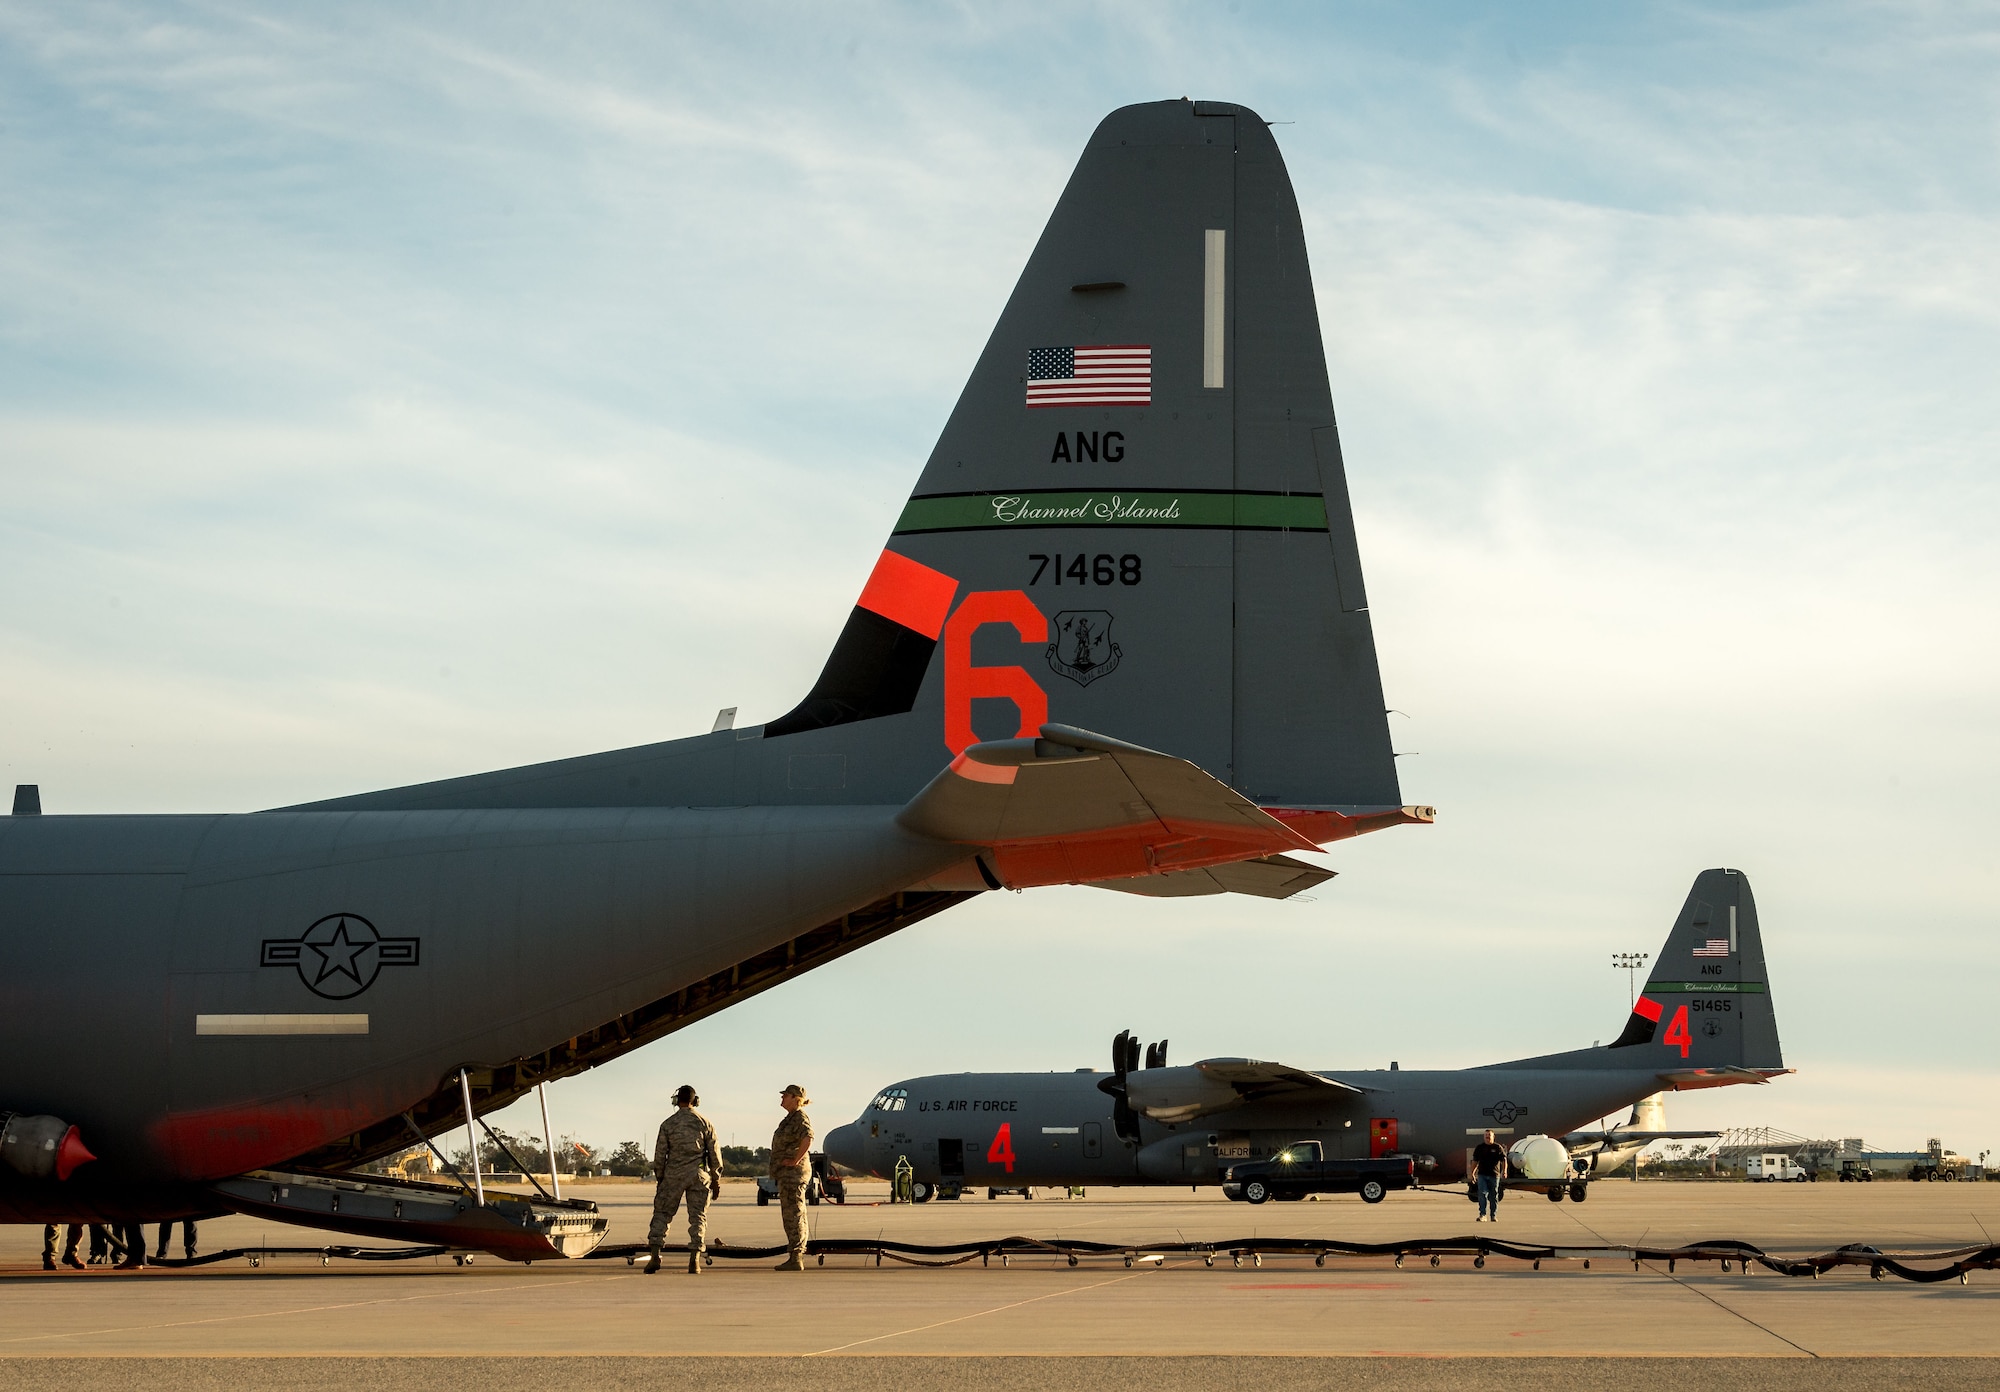 Two C-130Js of the 146th Airlift Wing, which carry the Modular Airborne Fire Fighting System, are reloaded with flame retardant chemicals at Channel Islands Air National Guard Base in Port Hueneme, California, in preparation for operations to contain the Thomas wildfire burning in Ventura and Santa Barbara Counties, Dec. 9, 2017. (U.S. Air Force photo by J.M. Eddins Jr.)